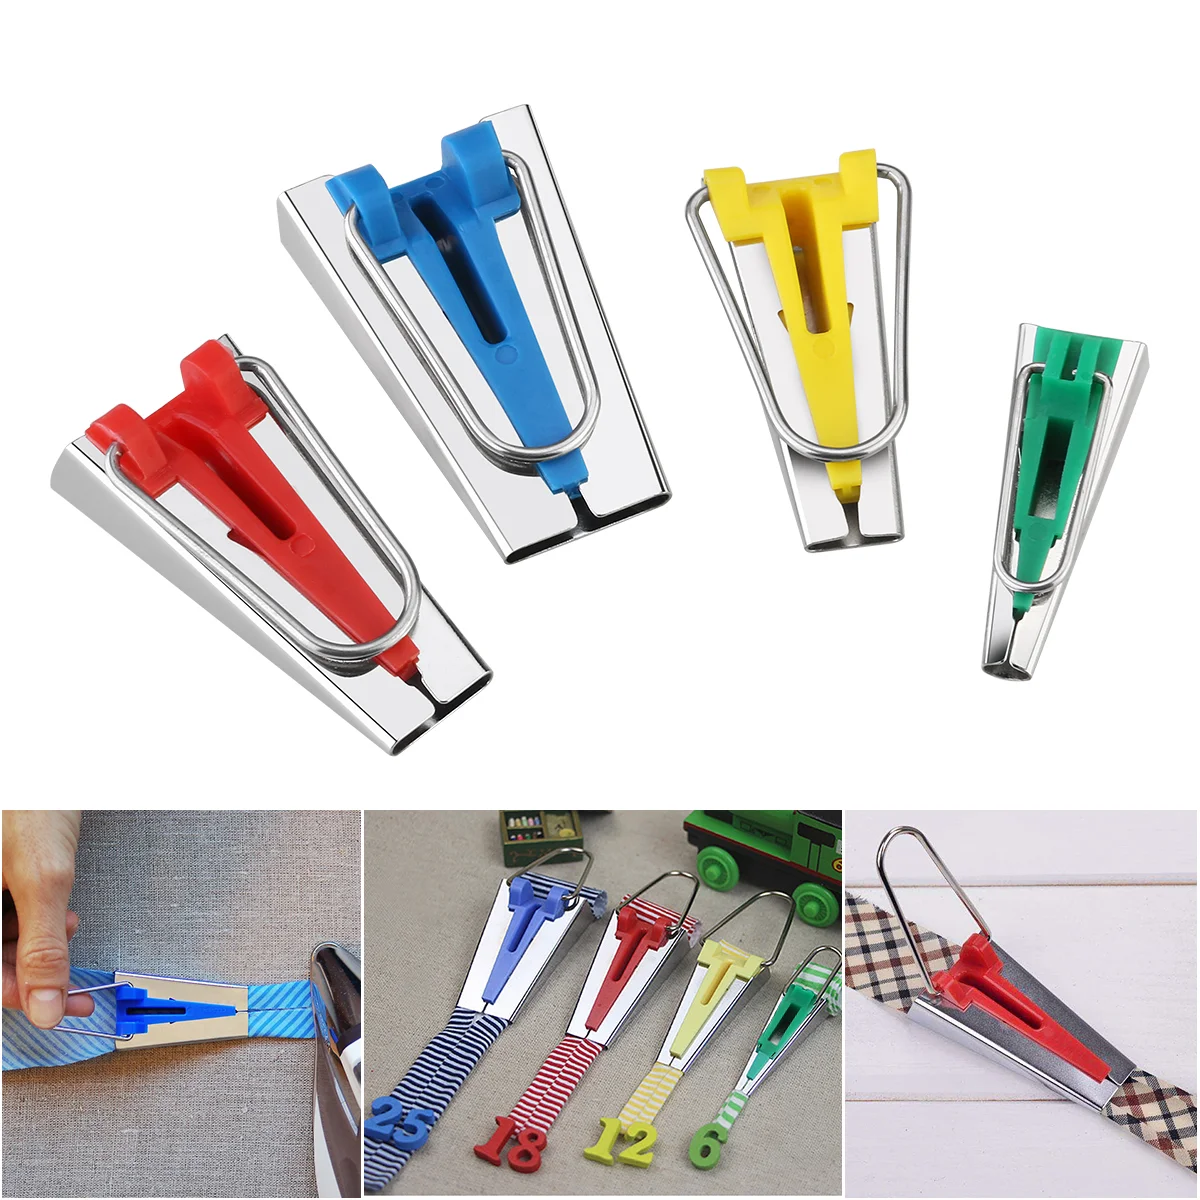 

6mm 12mm 18mm 25mm Durable Reusable Portable Binding Tools Sewing Quilting Tools Fabric Bias Tape Makers for Sartorius